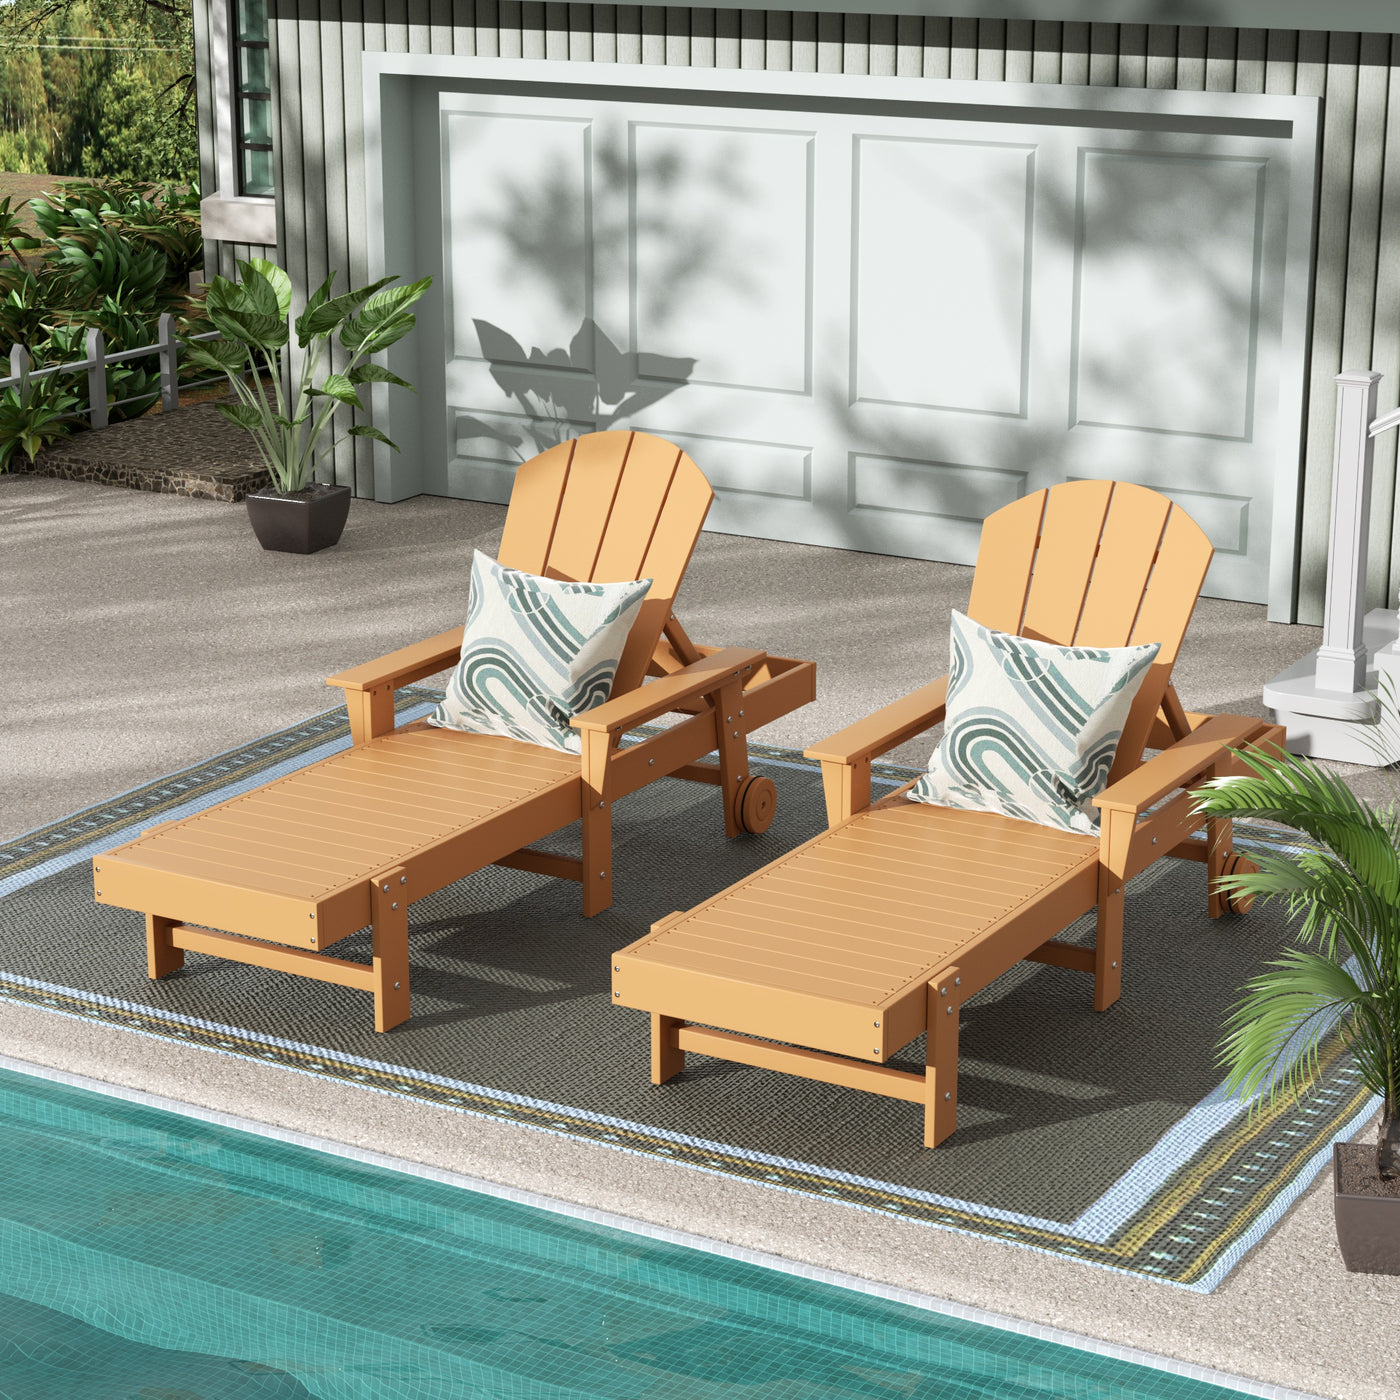 Malibu 2 Piece Reclining Chaise Lounge With Arms & Wheels